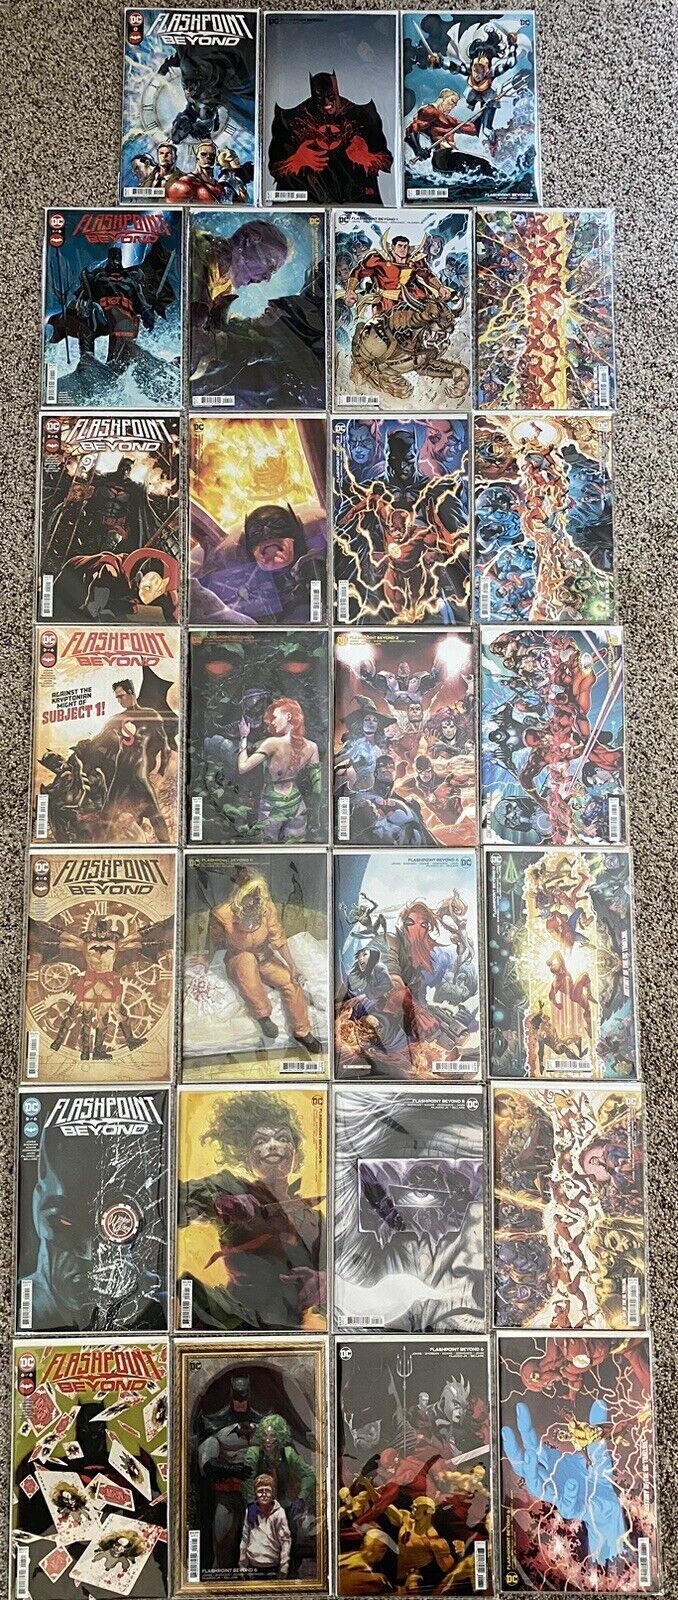 FLASHPOINT BEYOND #0-6 COMPLETE 27 COVER SET - ALL VARIANTS + INCENTIVES ALL NM